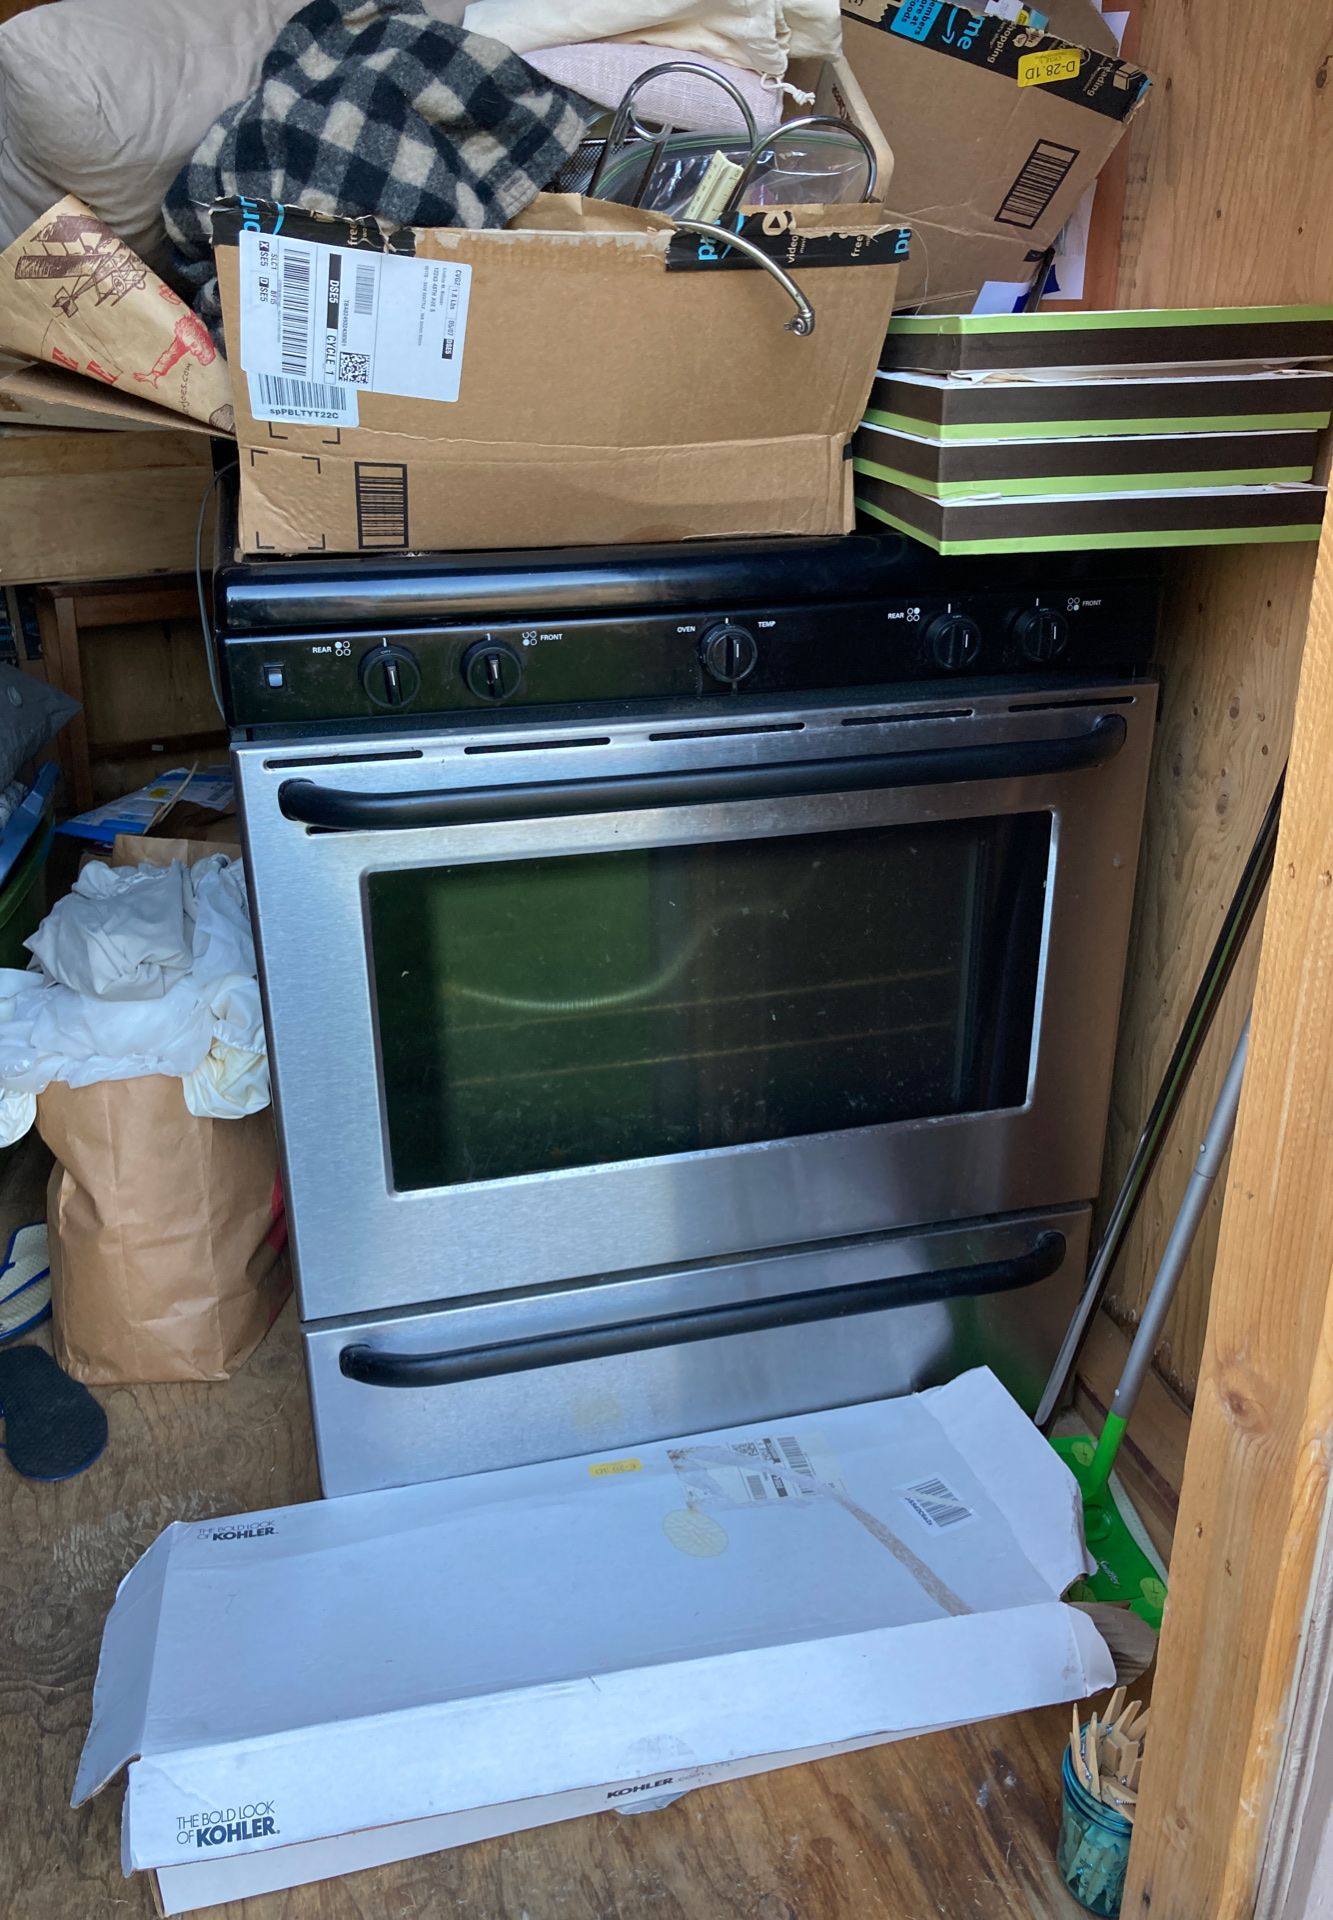 Used gas stove range. Works and it’s free!